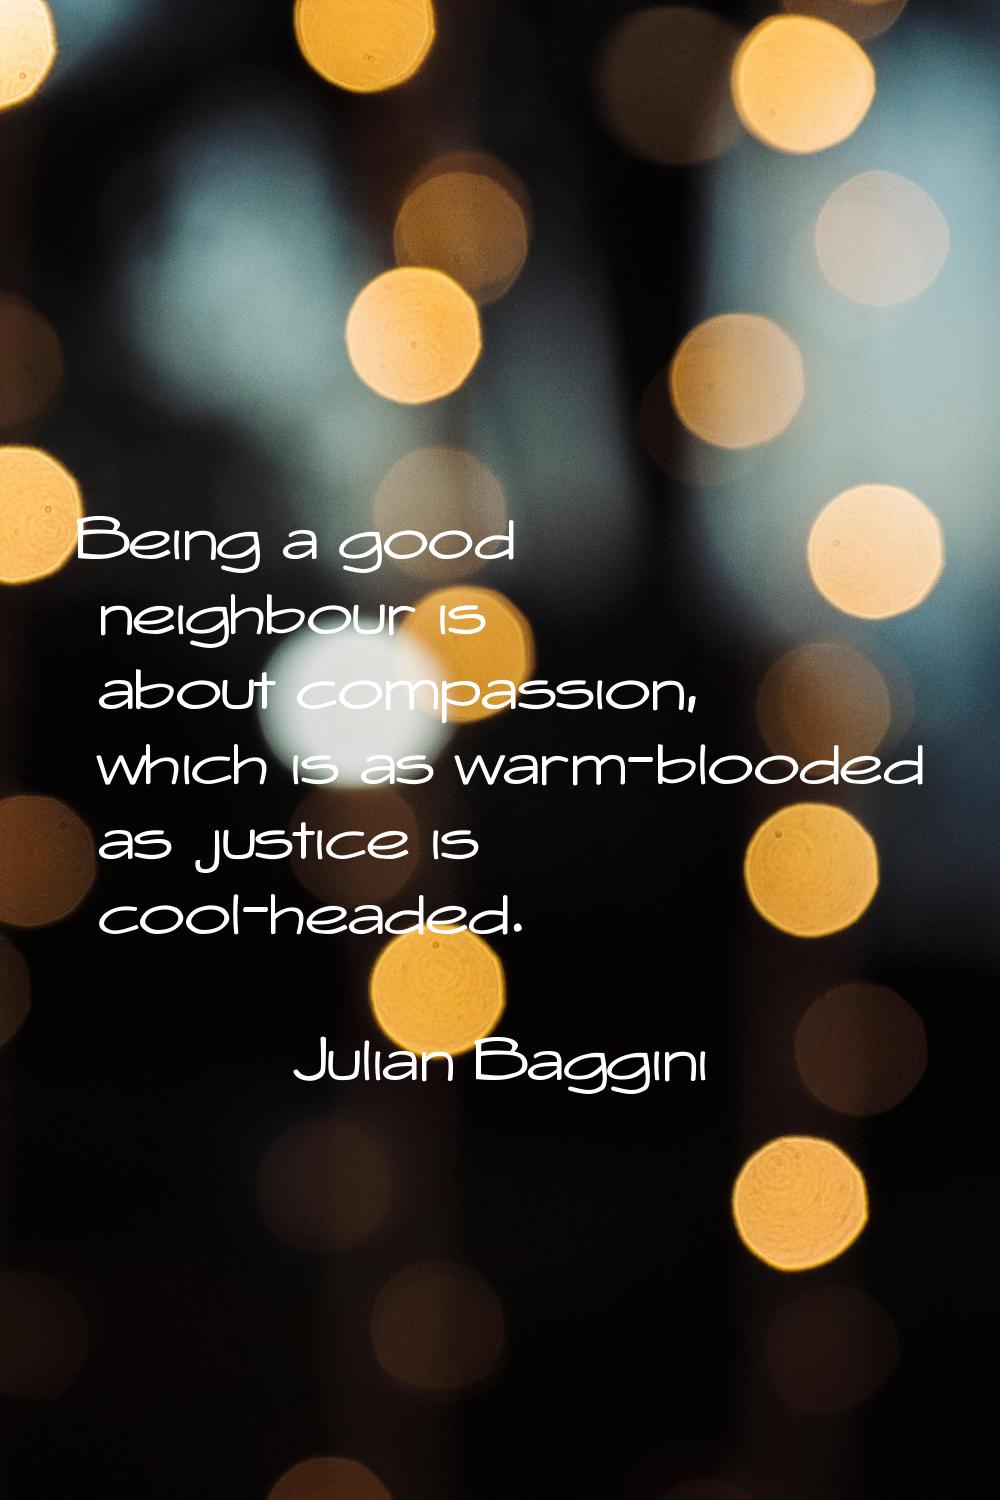 Being a good neighbour is about compassion, which is as warm-blooded as justice is cool-headed.